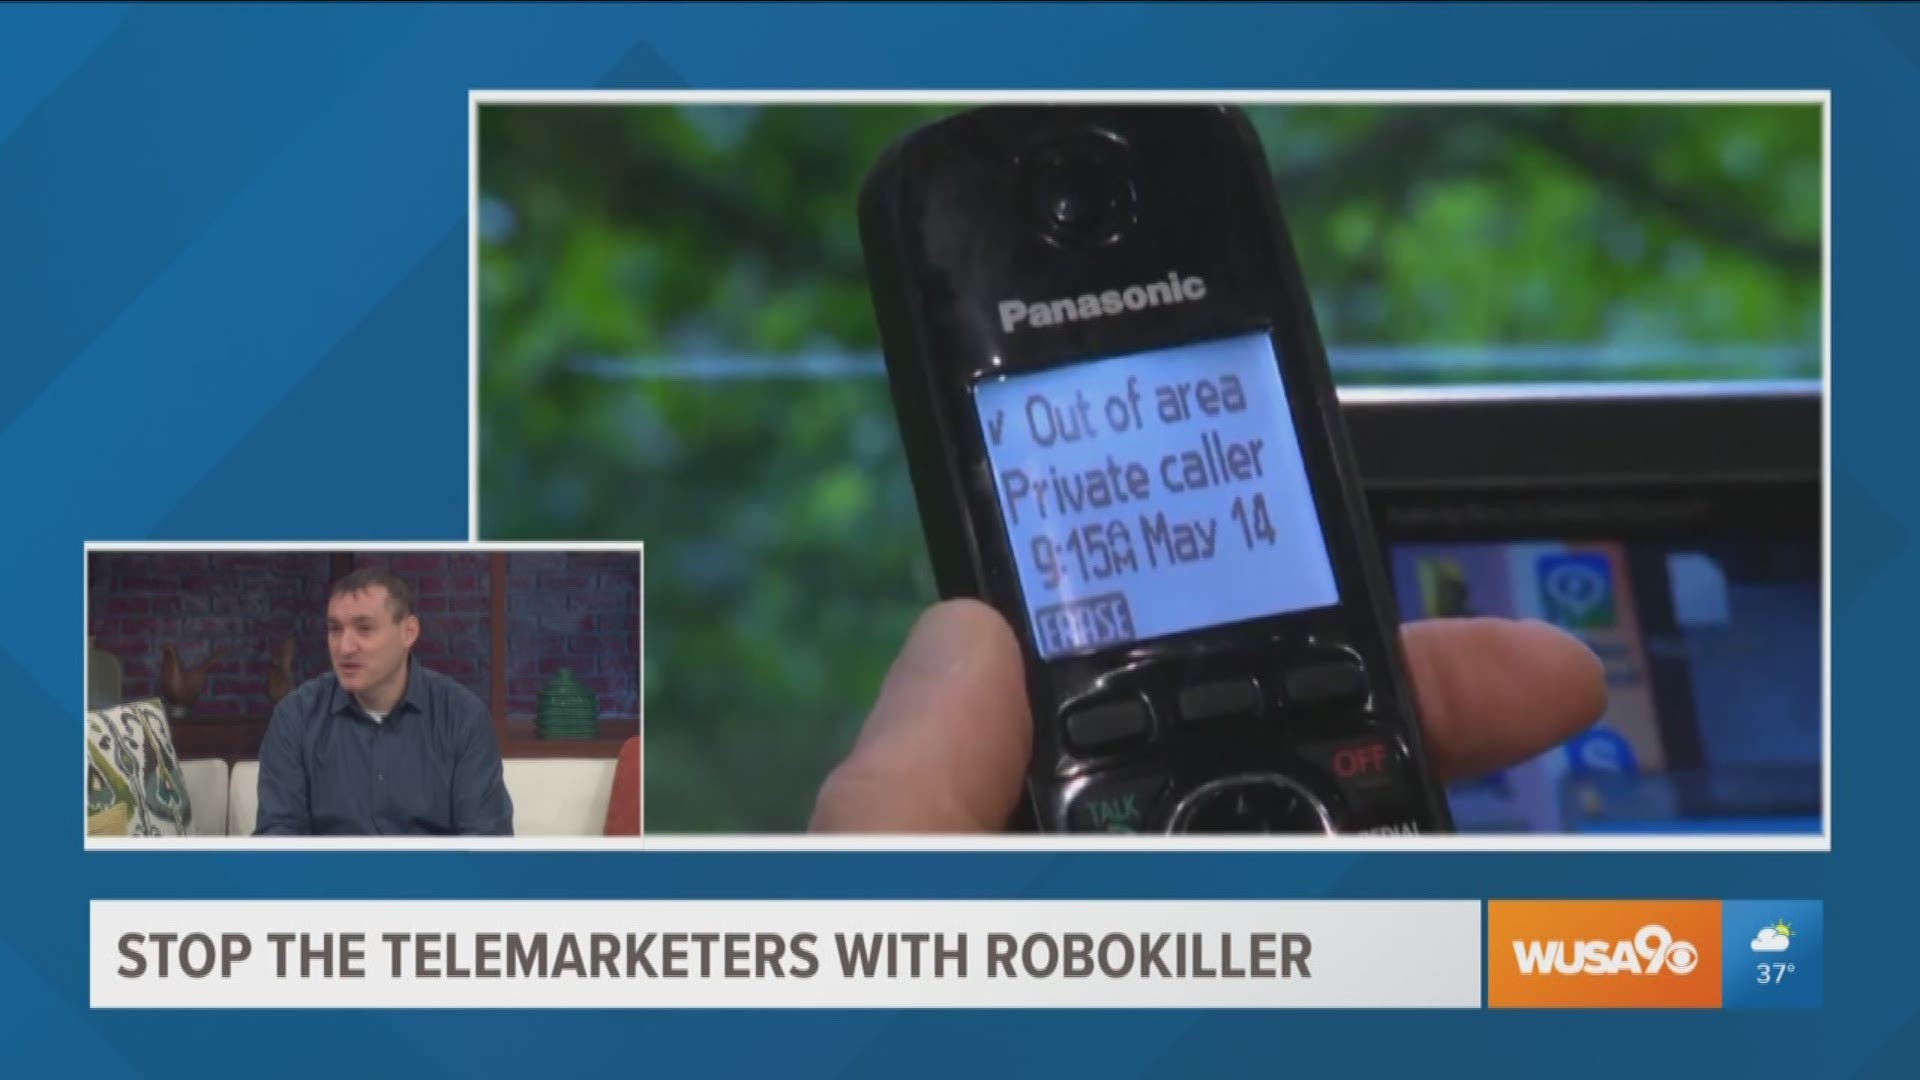 Are you tired or receiving calls from telemarketers? RoboKiller, created by Ethan Garr, is a call blocking app that gets revenge on telemarketers by countering spam calls with 'Answer Bots'.